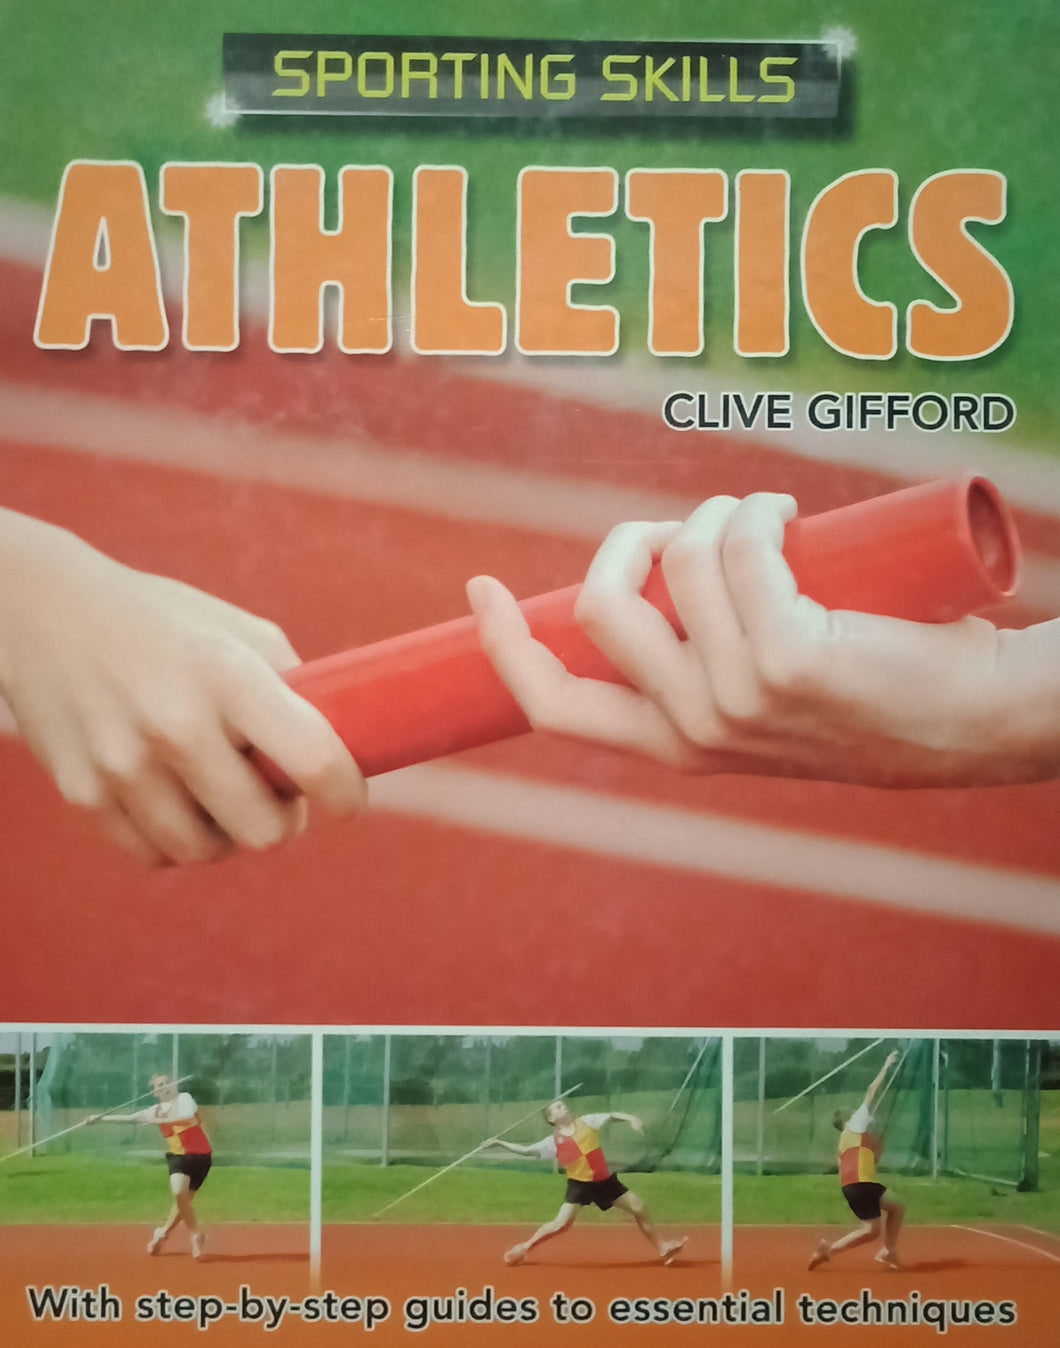 Sporting Skills : Athletics by Clive Gifford